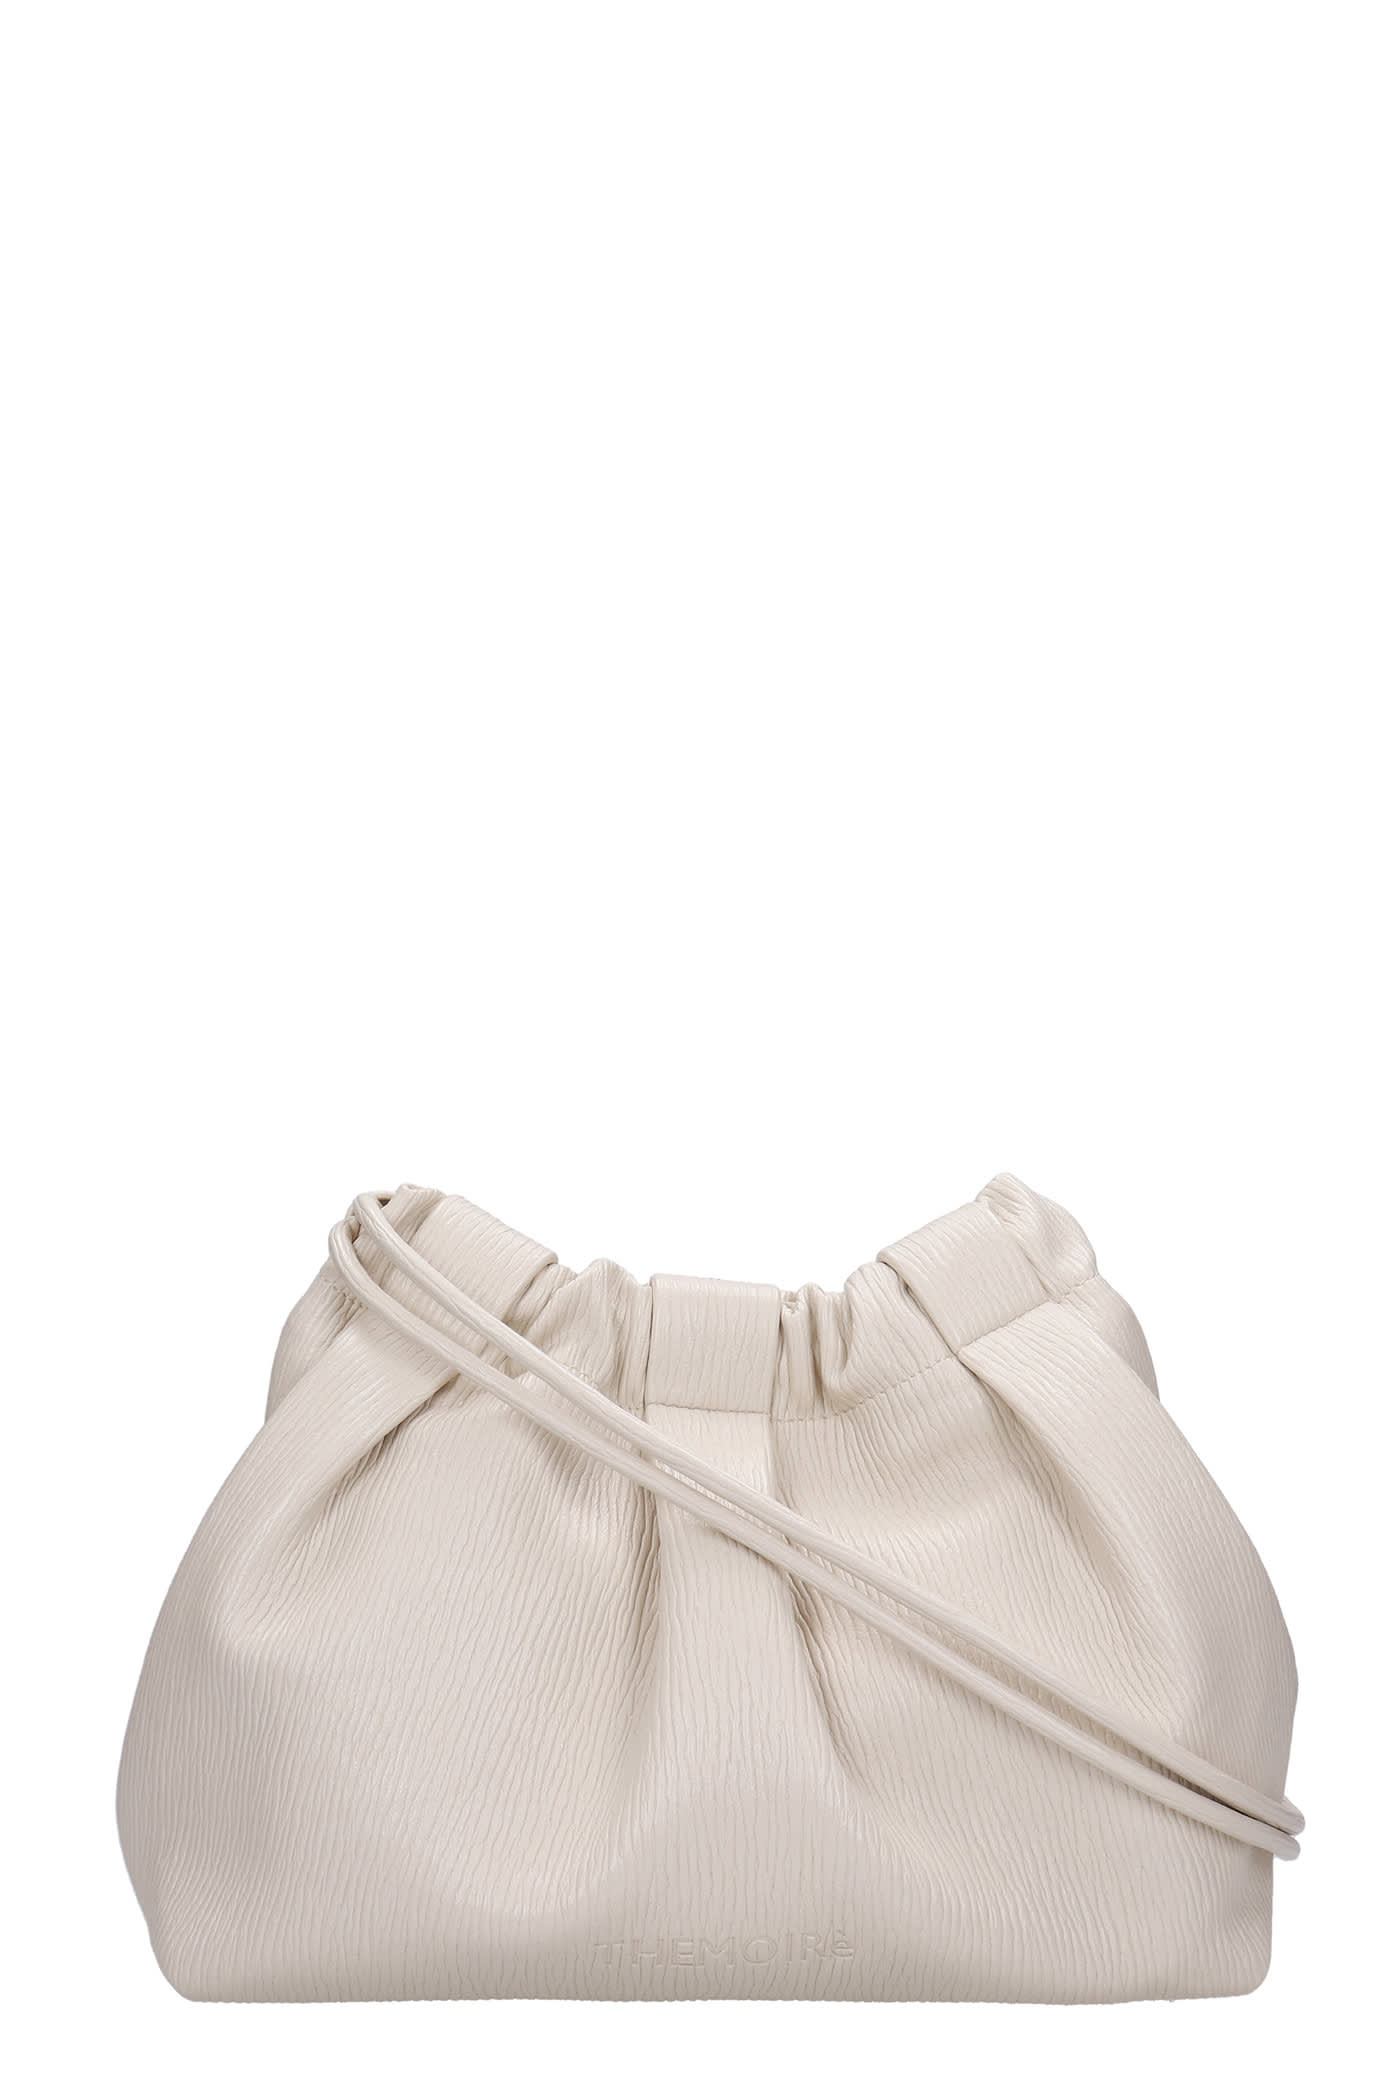 THEMOIRè Thetis Straw Shoulder Bag In Beige Faux Leather